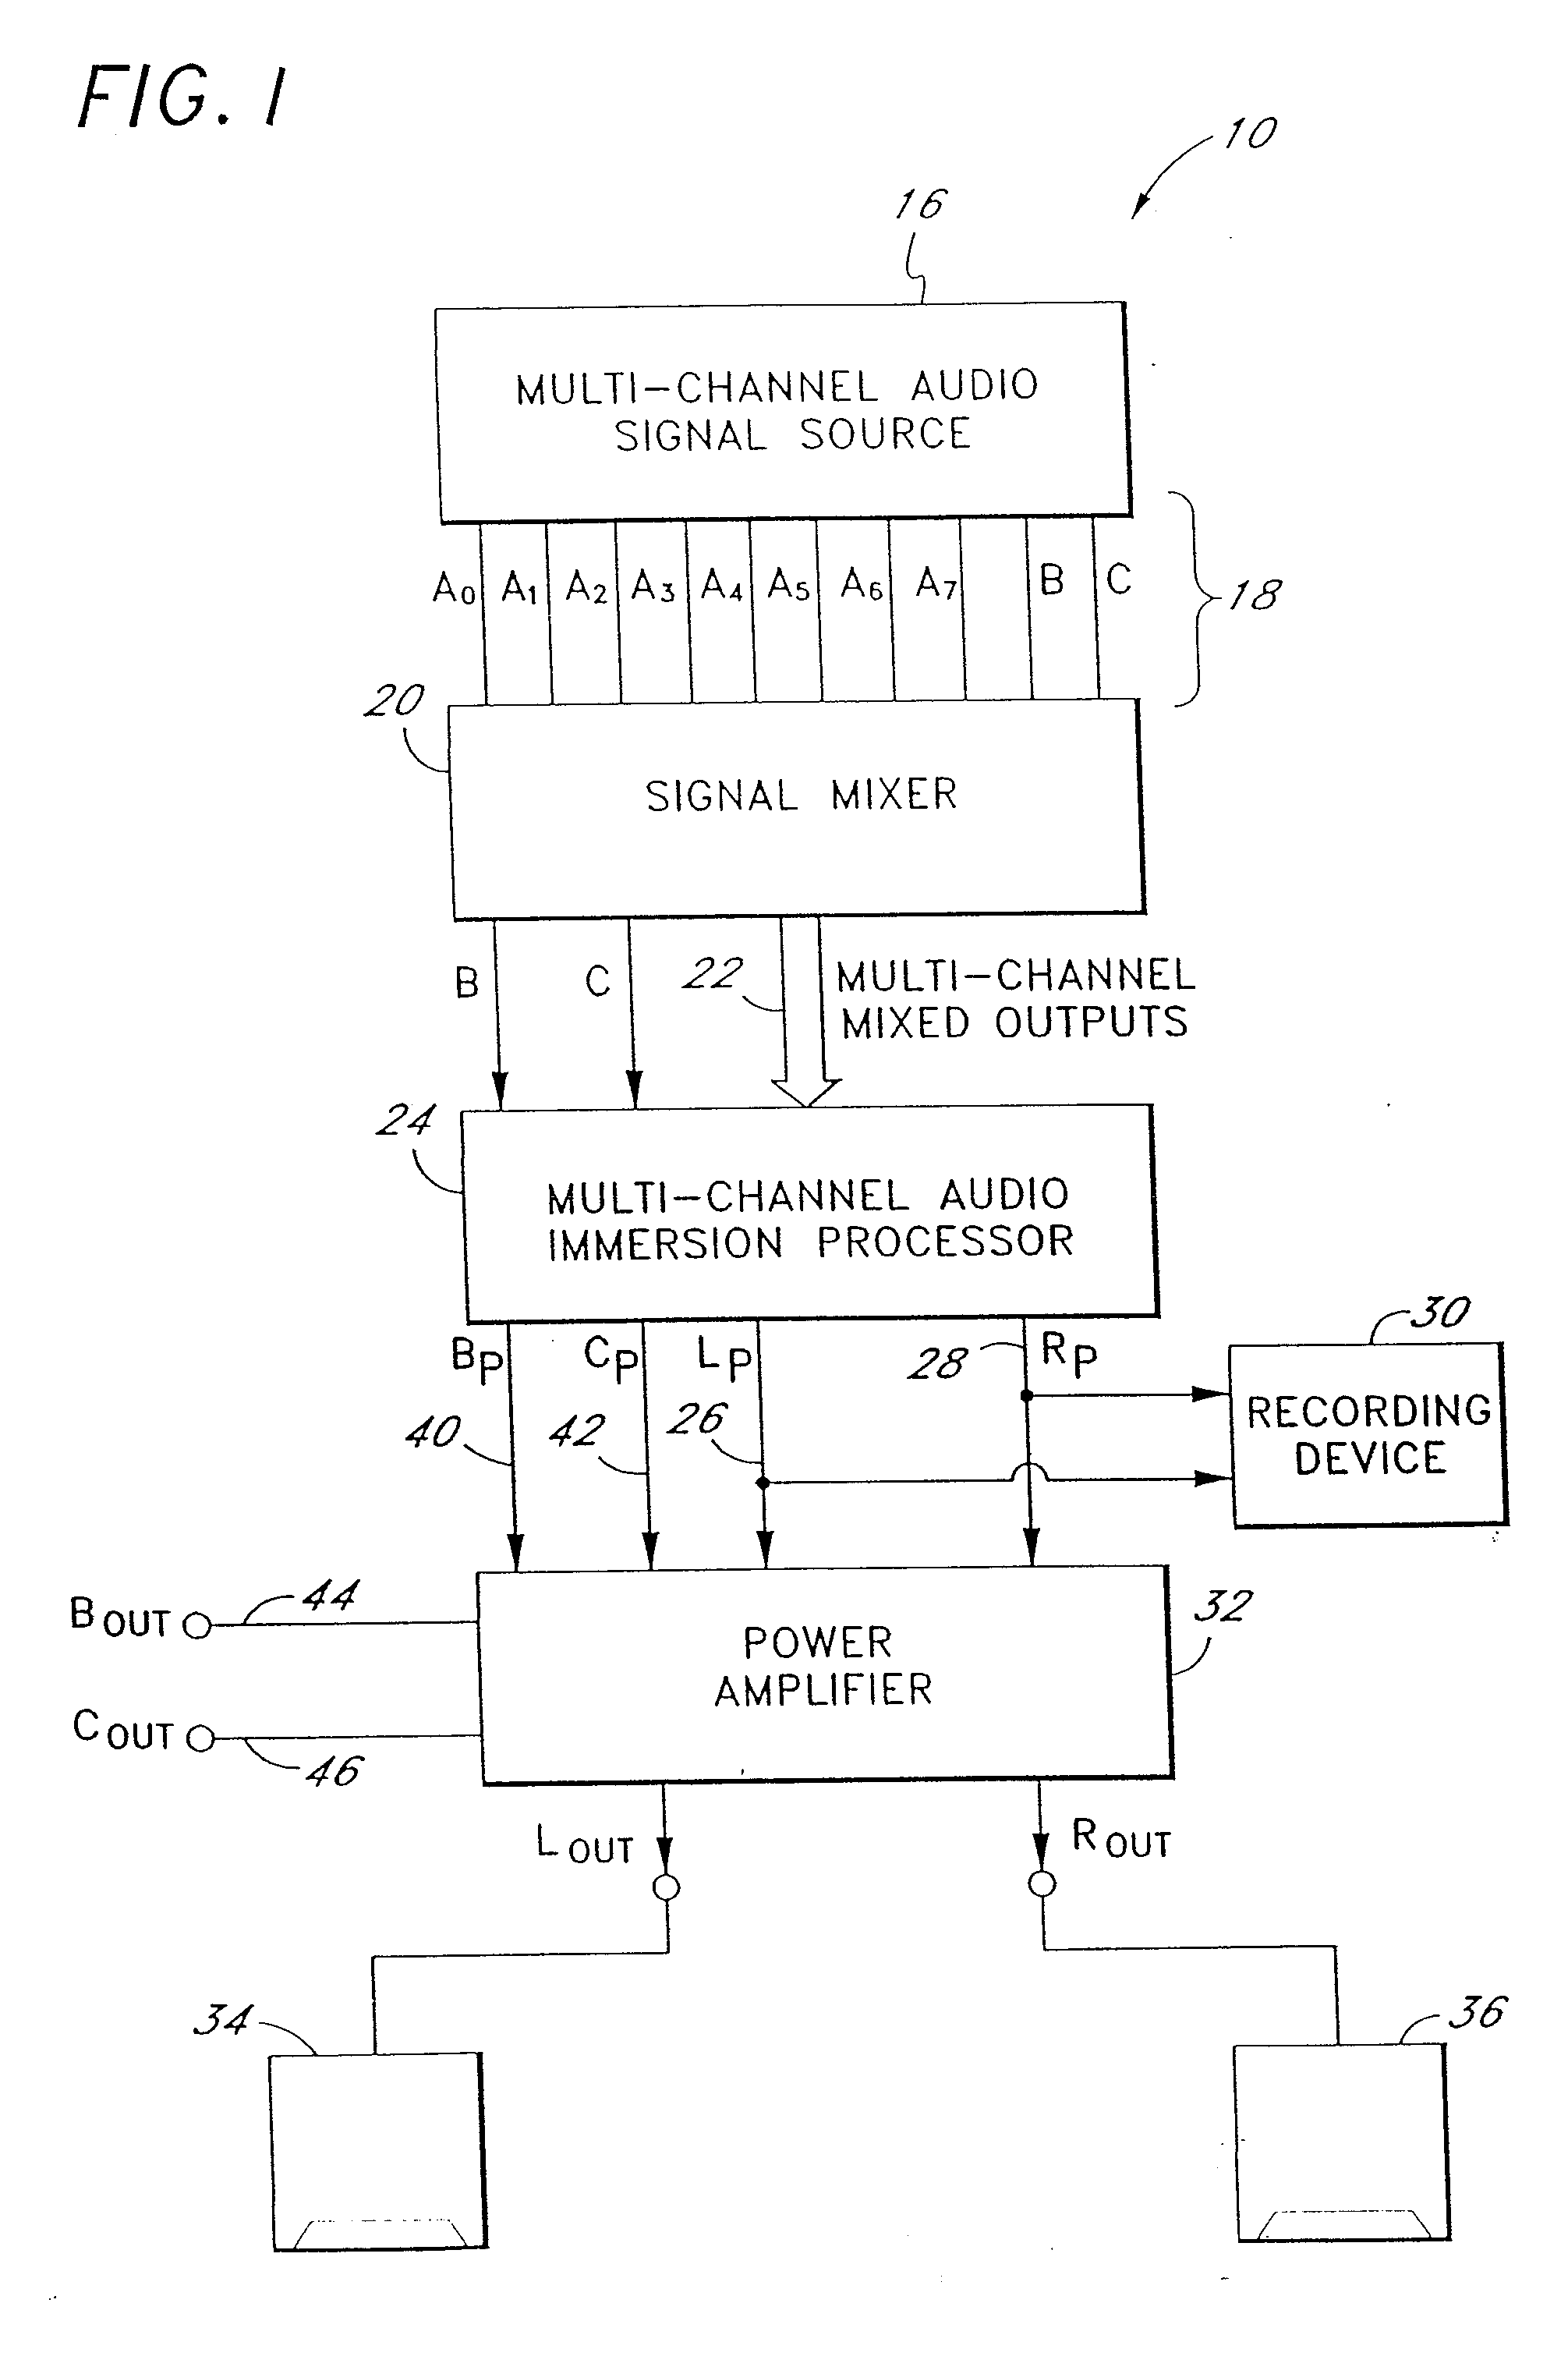 Multi-channel audio enhancement system for use in recording and playback and methods for providing same